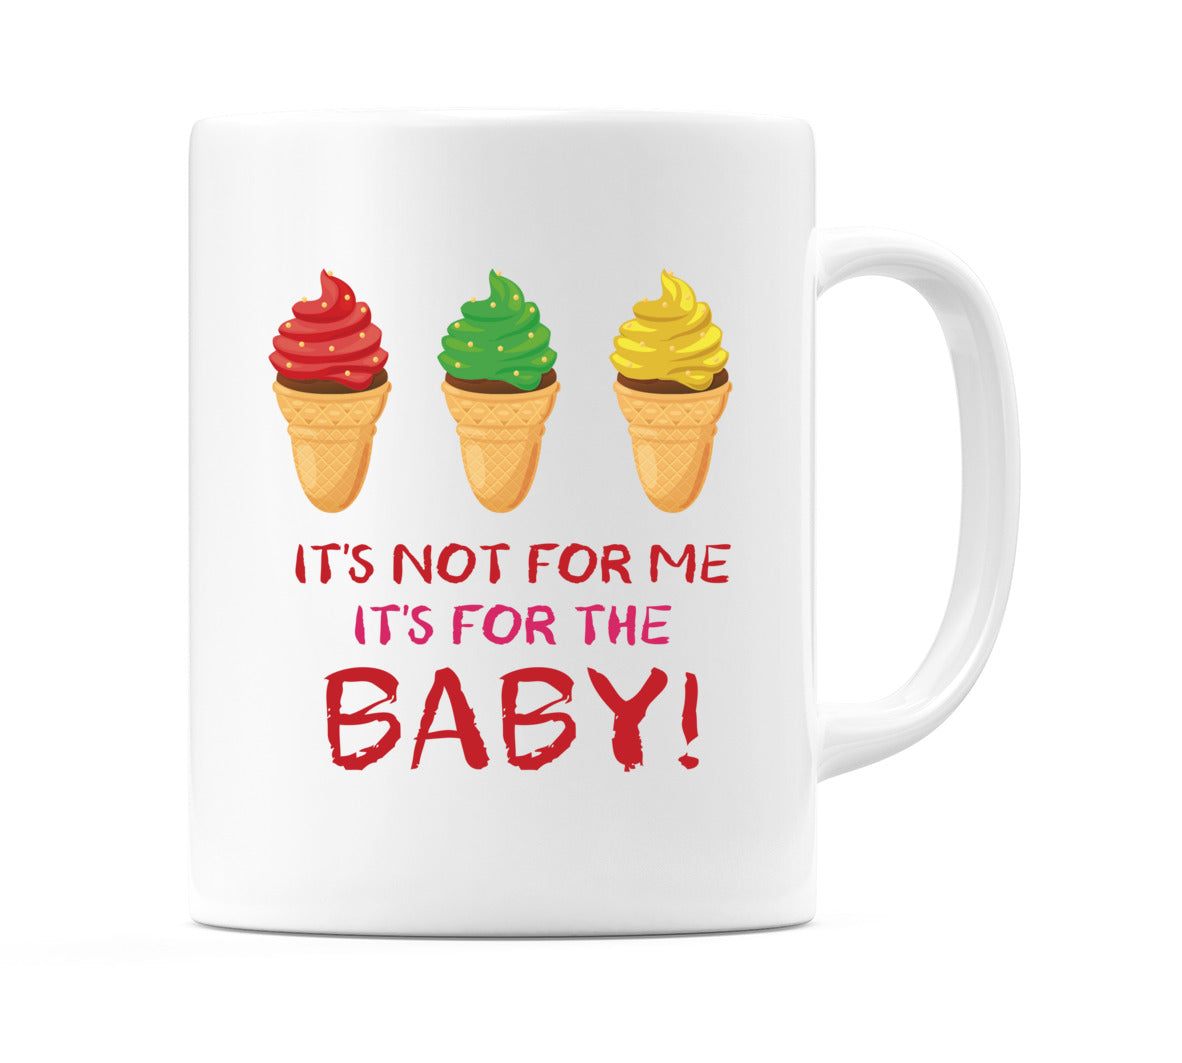 It's Not For Me, It's For The Baby! Mug